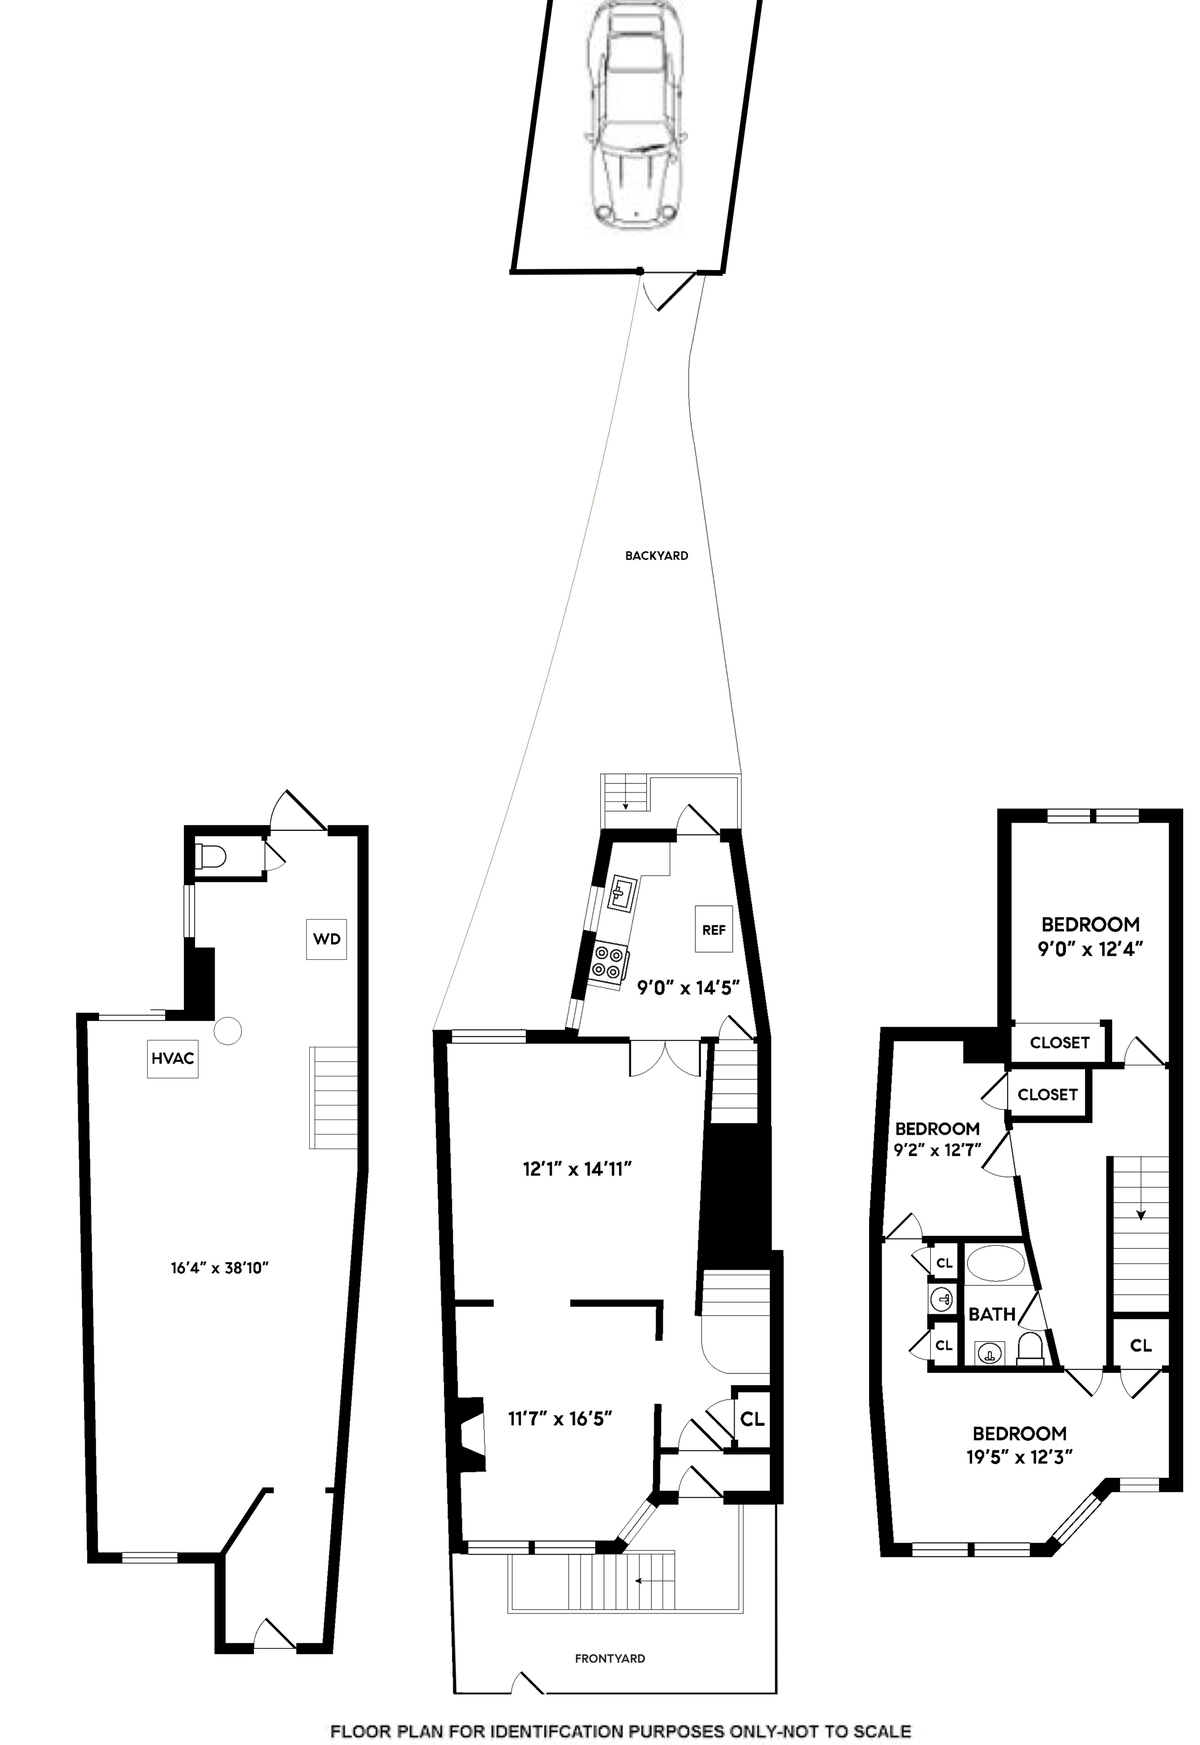 floorplan showing three bedrooms and one full bath in the house